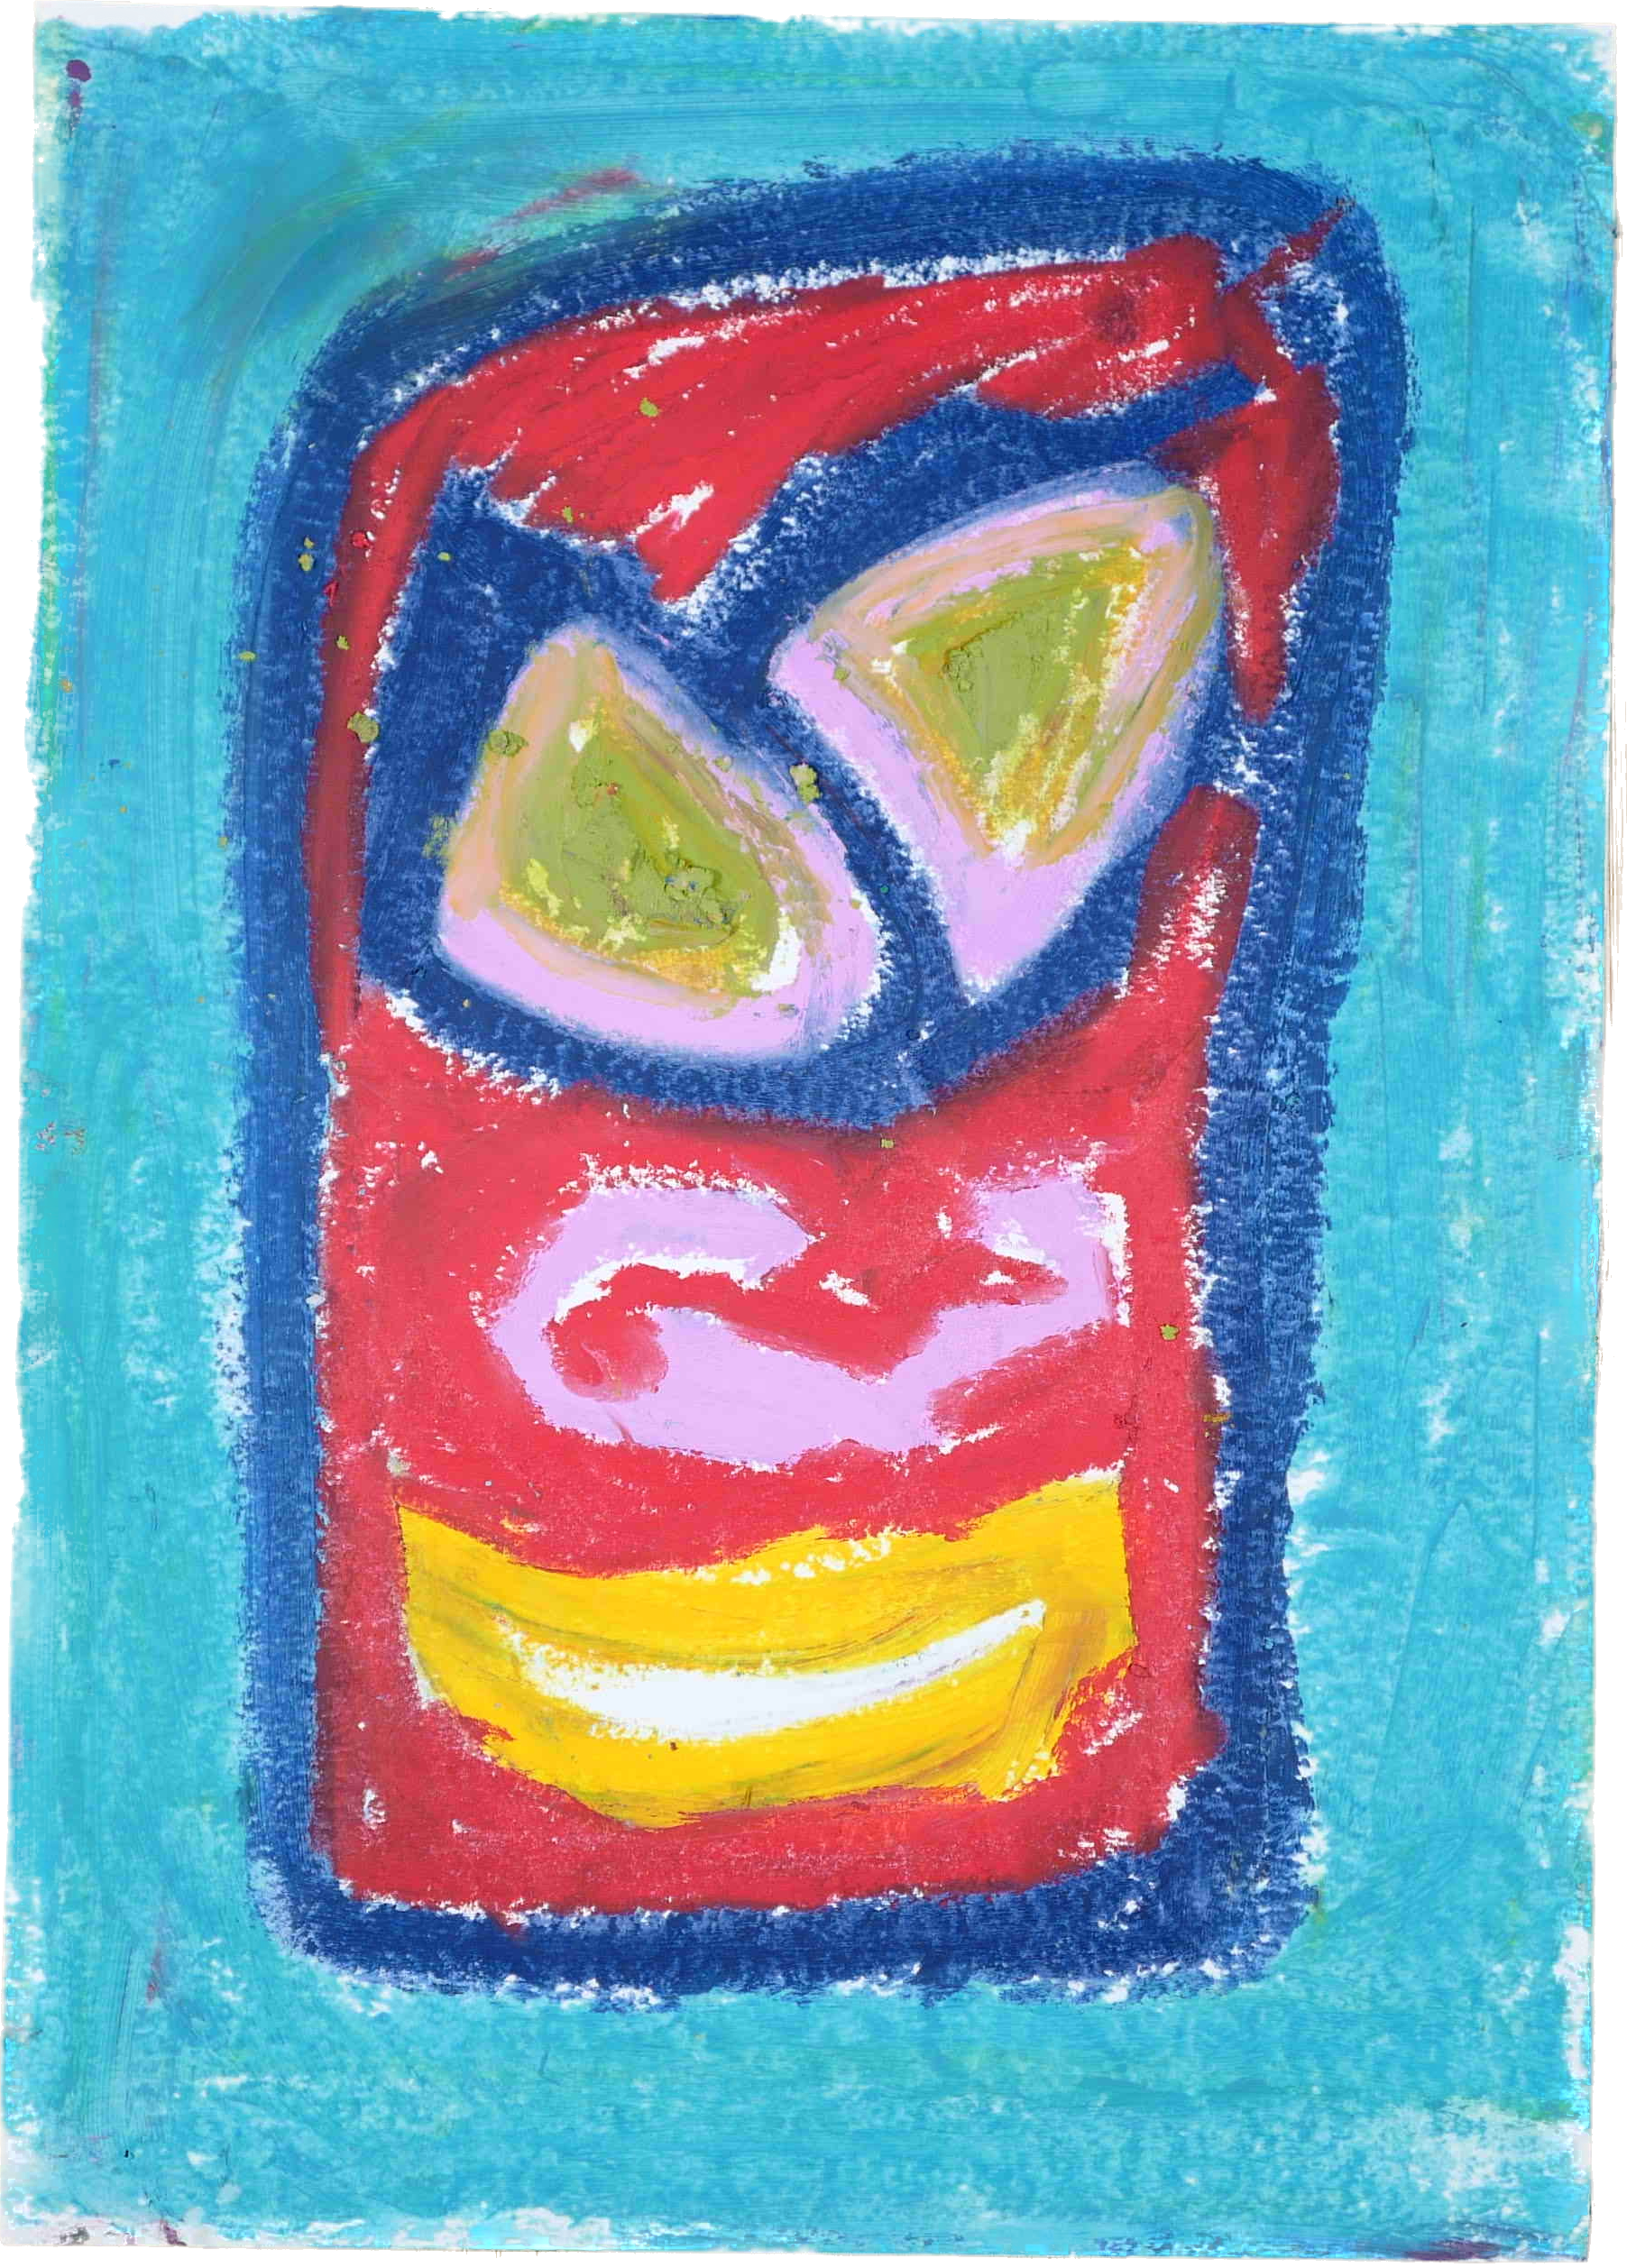 "Lenfantvivant vibrant abstract facial expression" "Sauna Fusion Art with radiant colors" "Expressive oil pastel artwork on paper" "Bold abstract art by Lenfantvivant" "Lenfantvivant's colorful imagination on display"